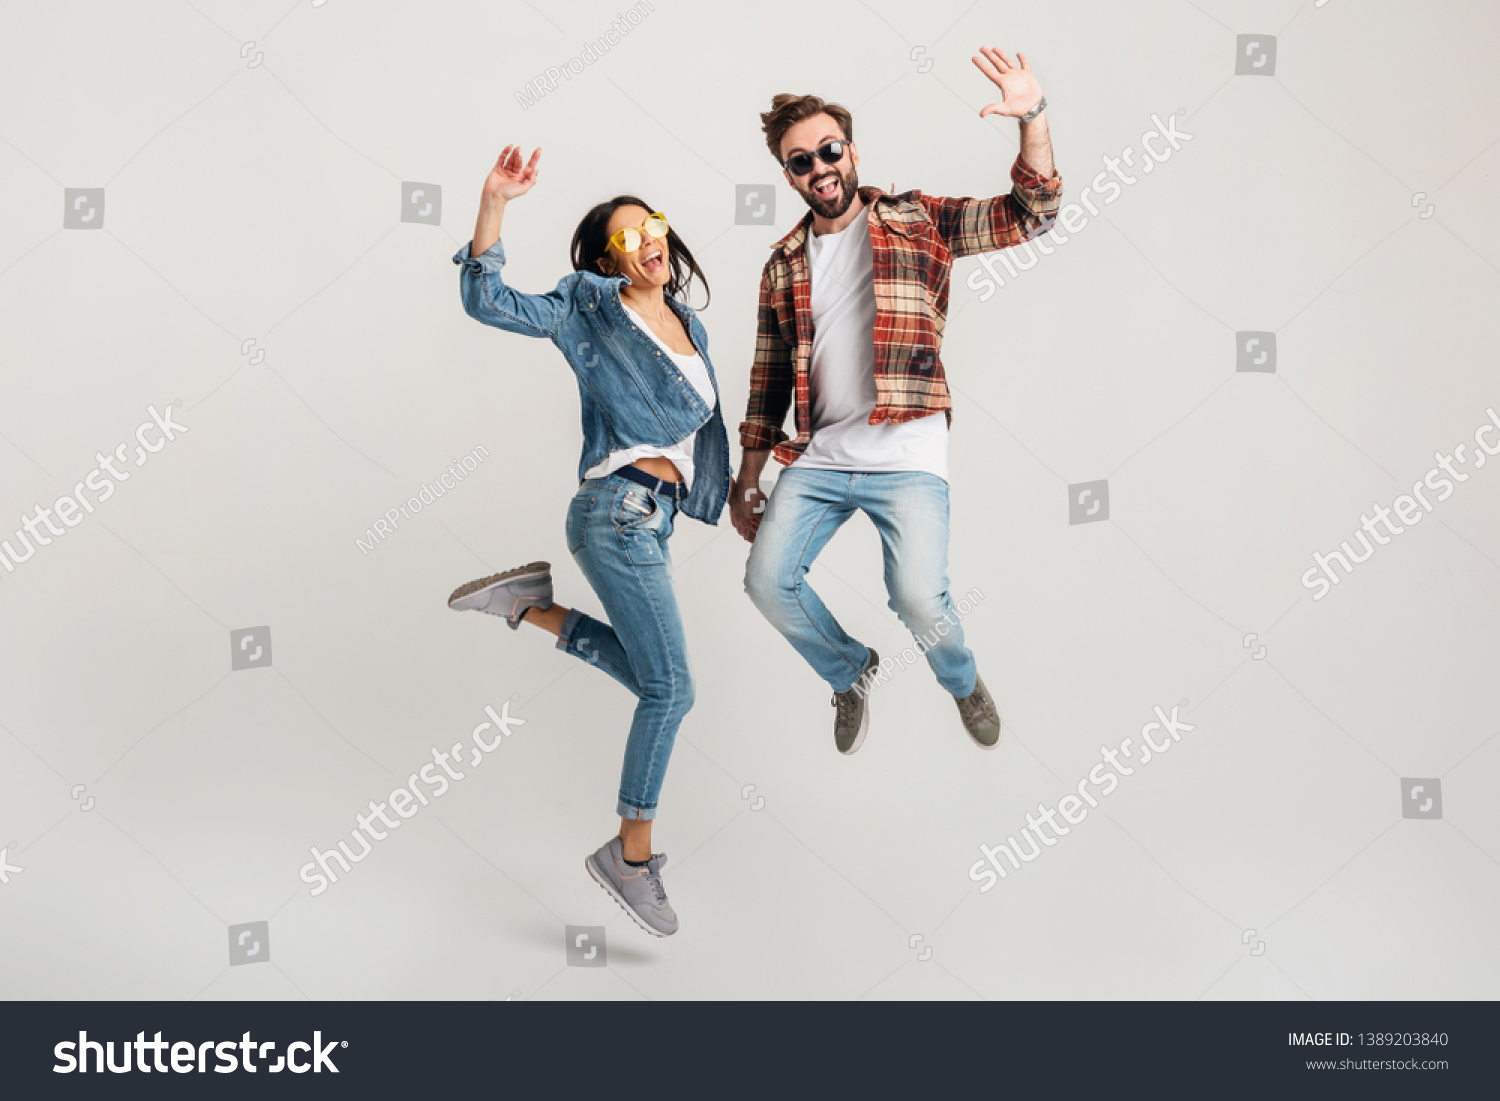 happy smiling couple isolated active jumping on white studio background, stylish mand and woman in casual denim hipster outfit wearing shirt and sunglasses having fun together, dating friends #1389203840